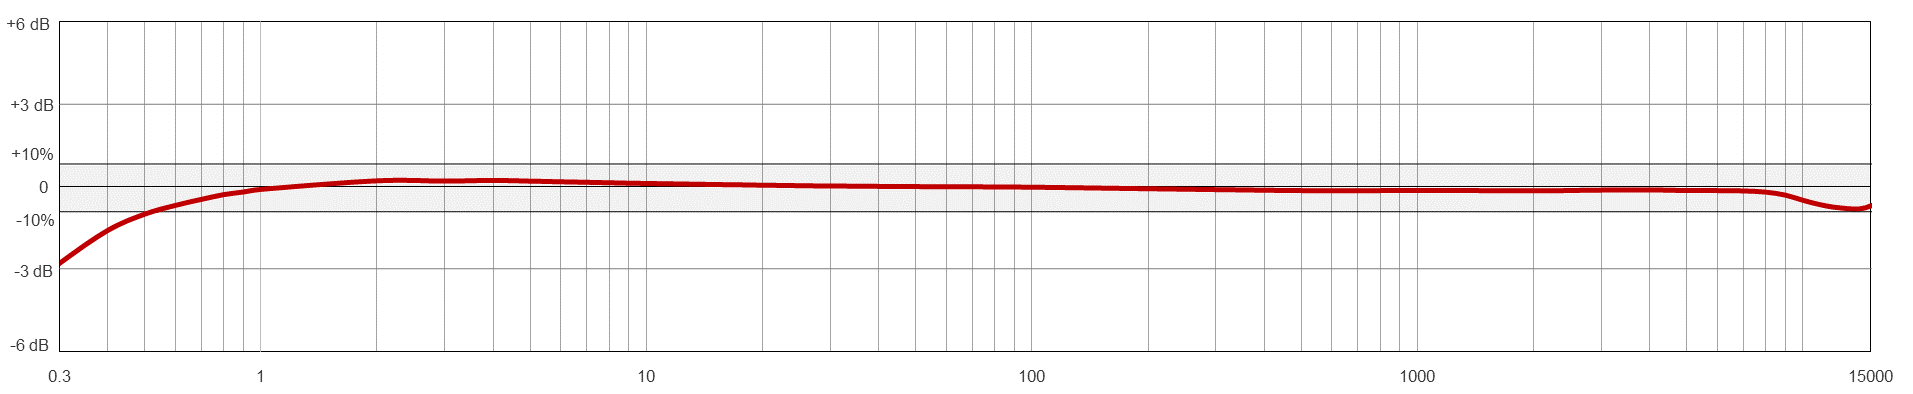 A line graph showing the frequency resopnse of a CTC AC292-M12A condition monitoring sensor.